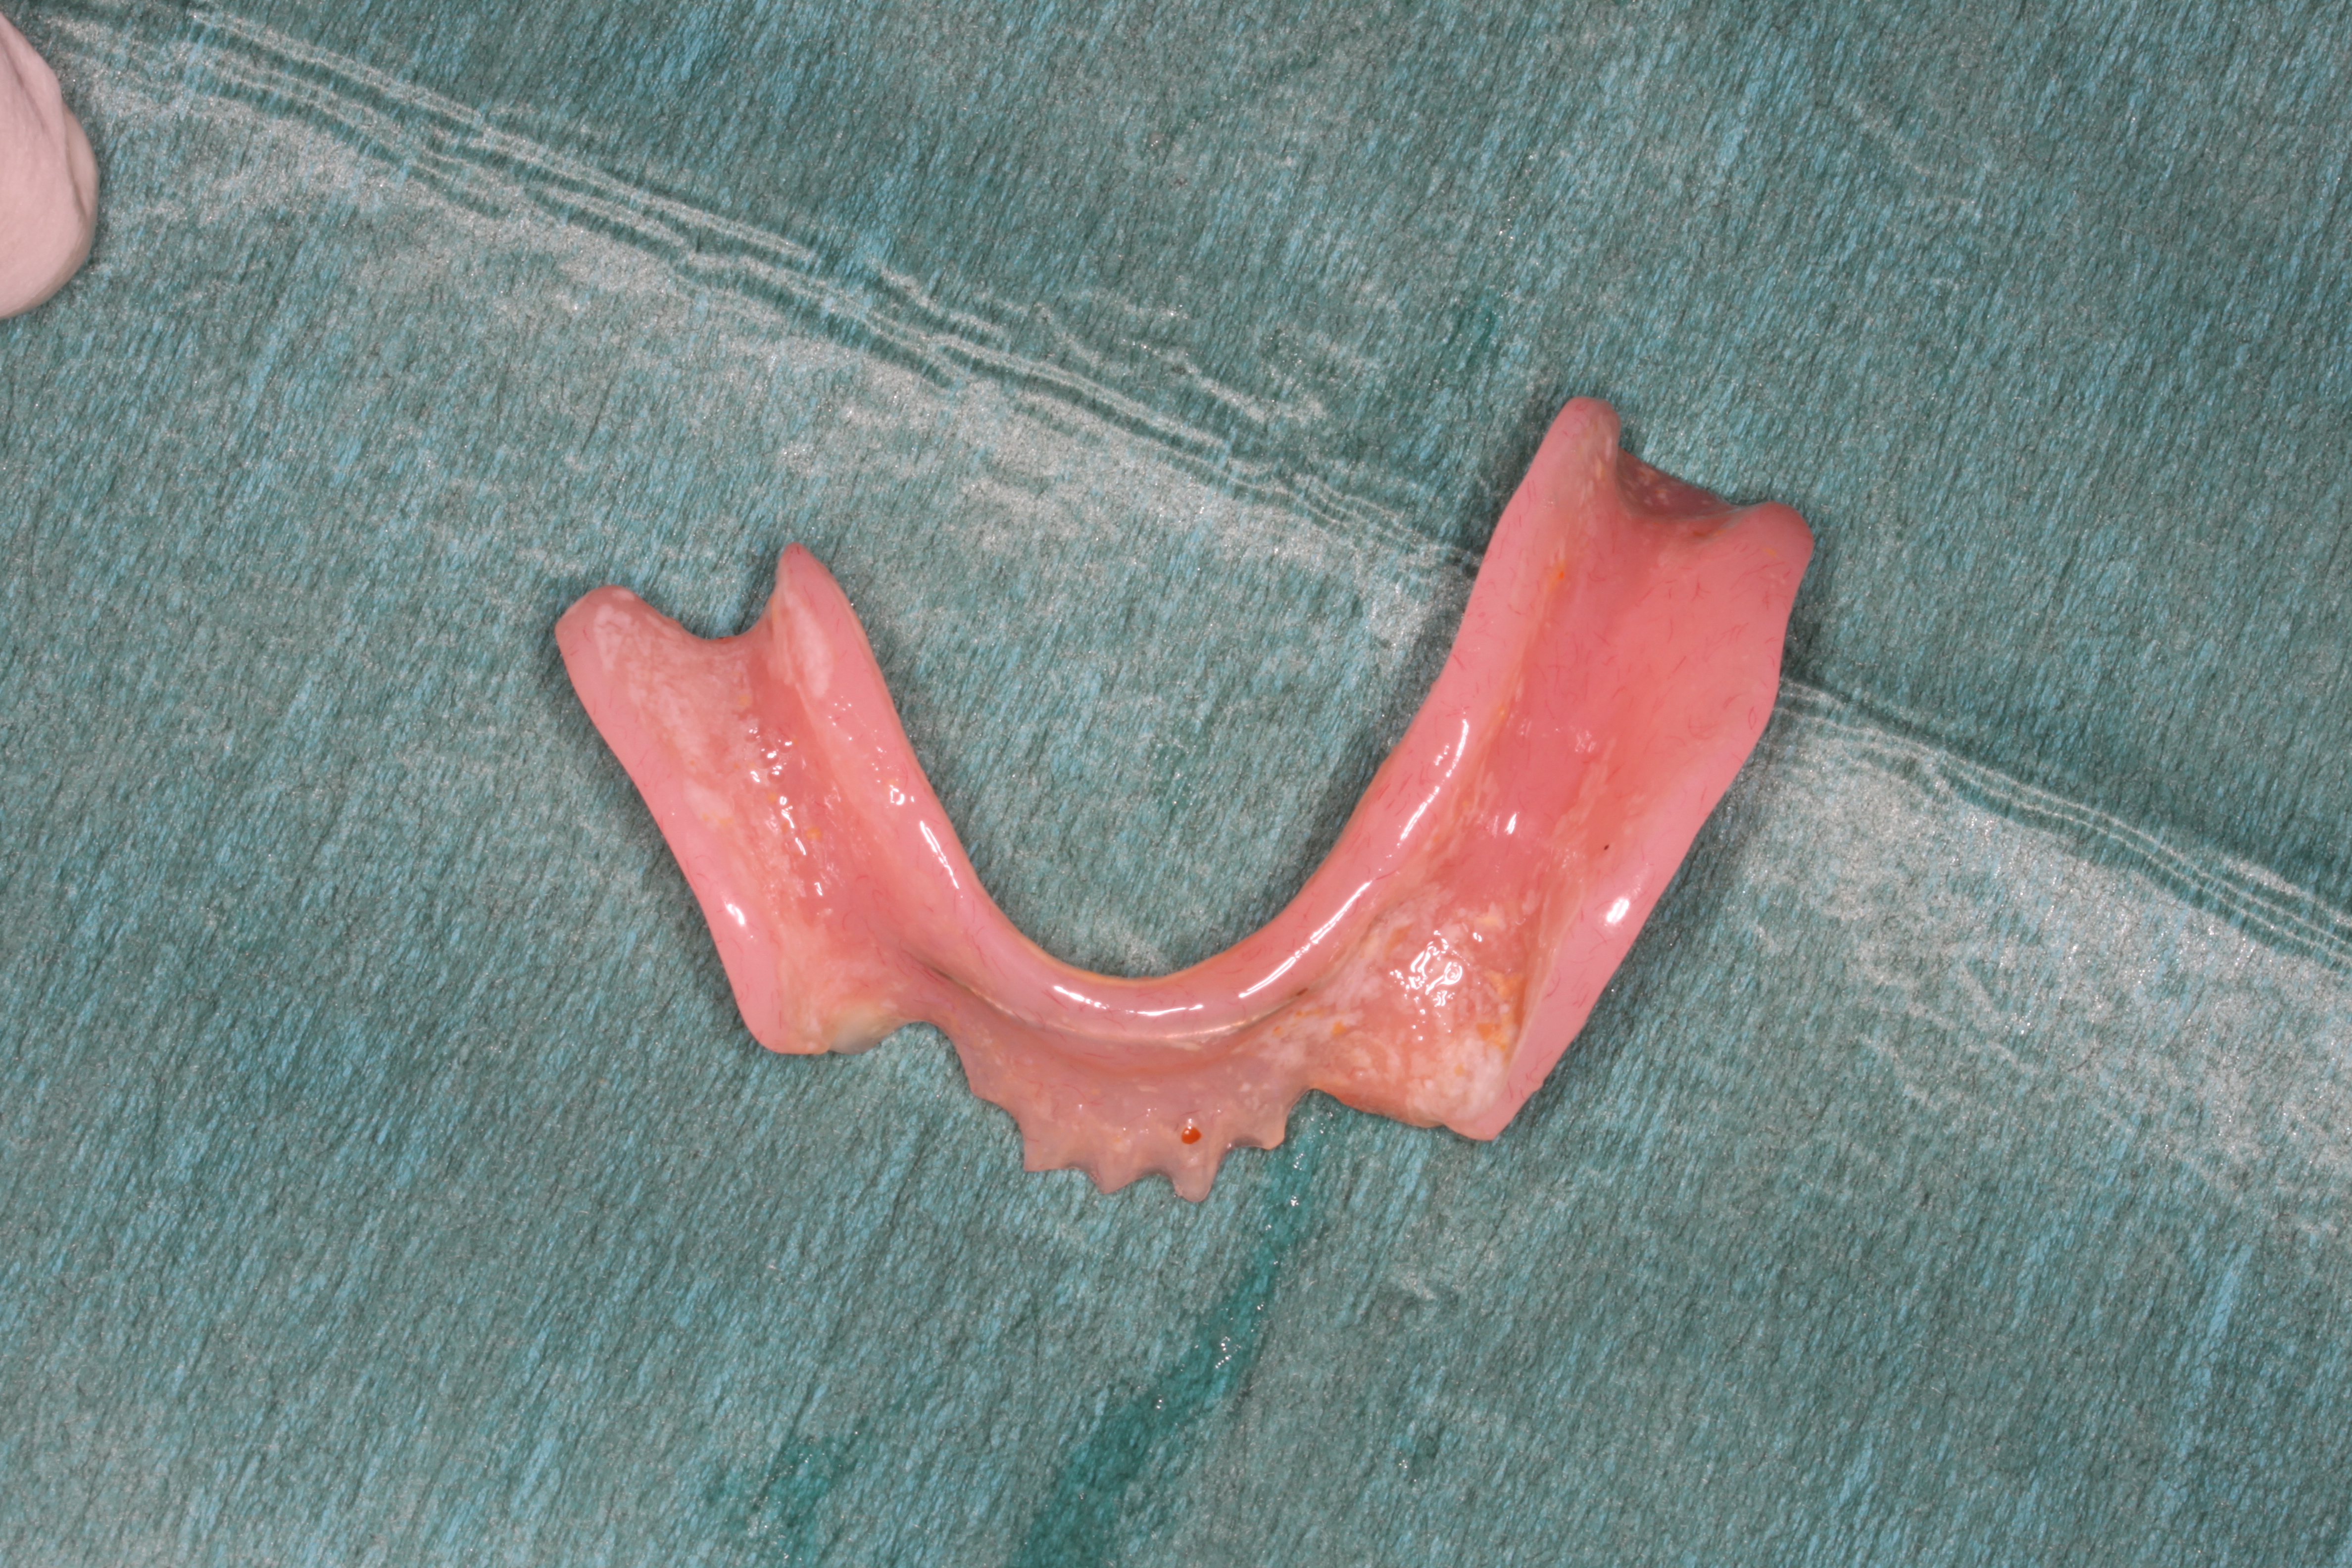 Lower denture showing fitting surface with plaque present